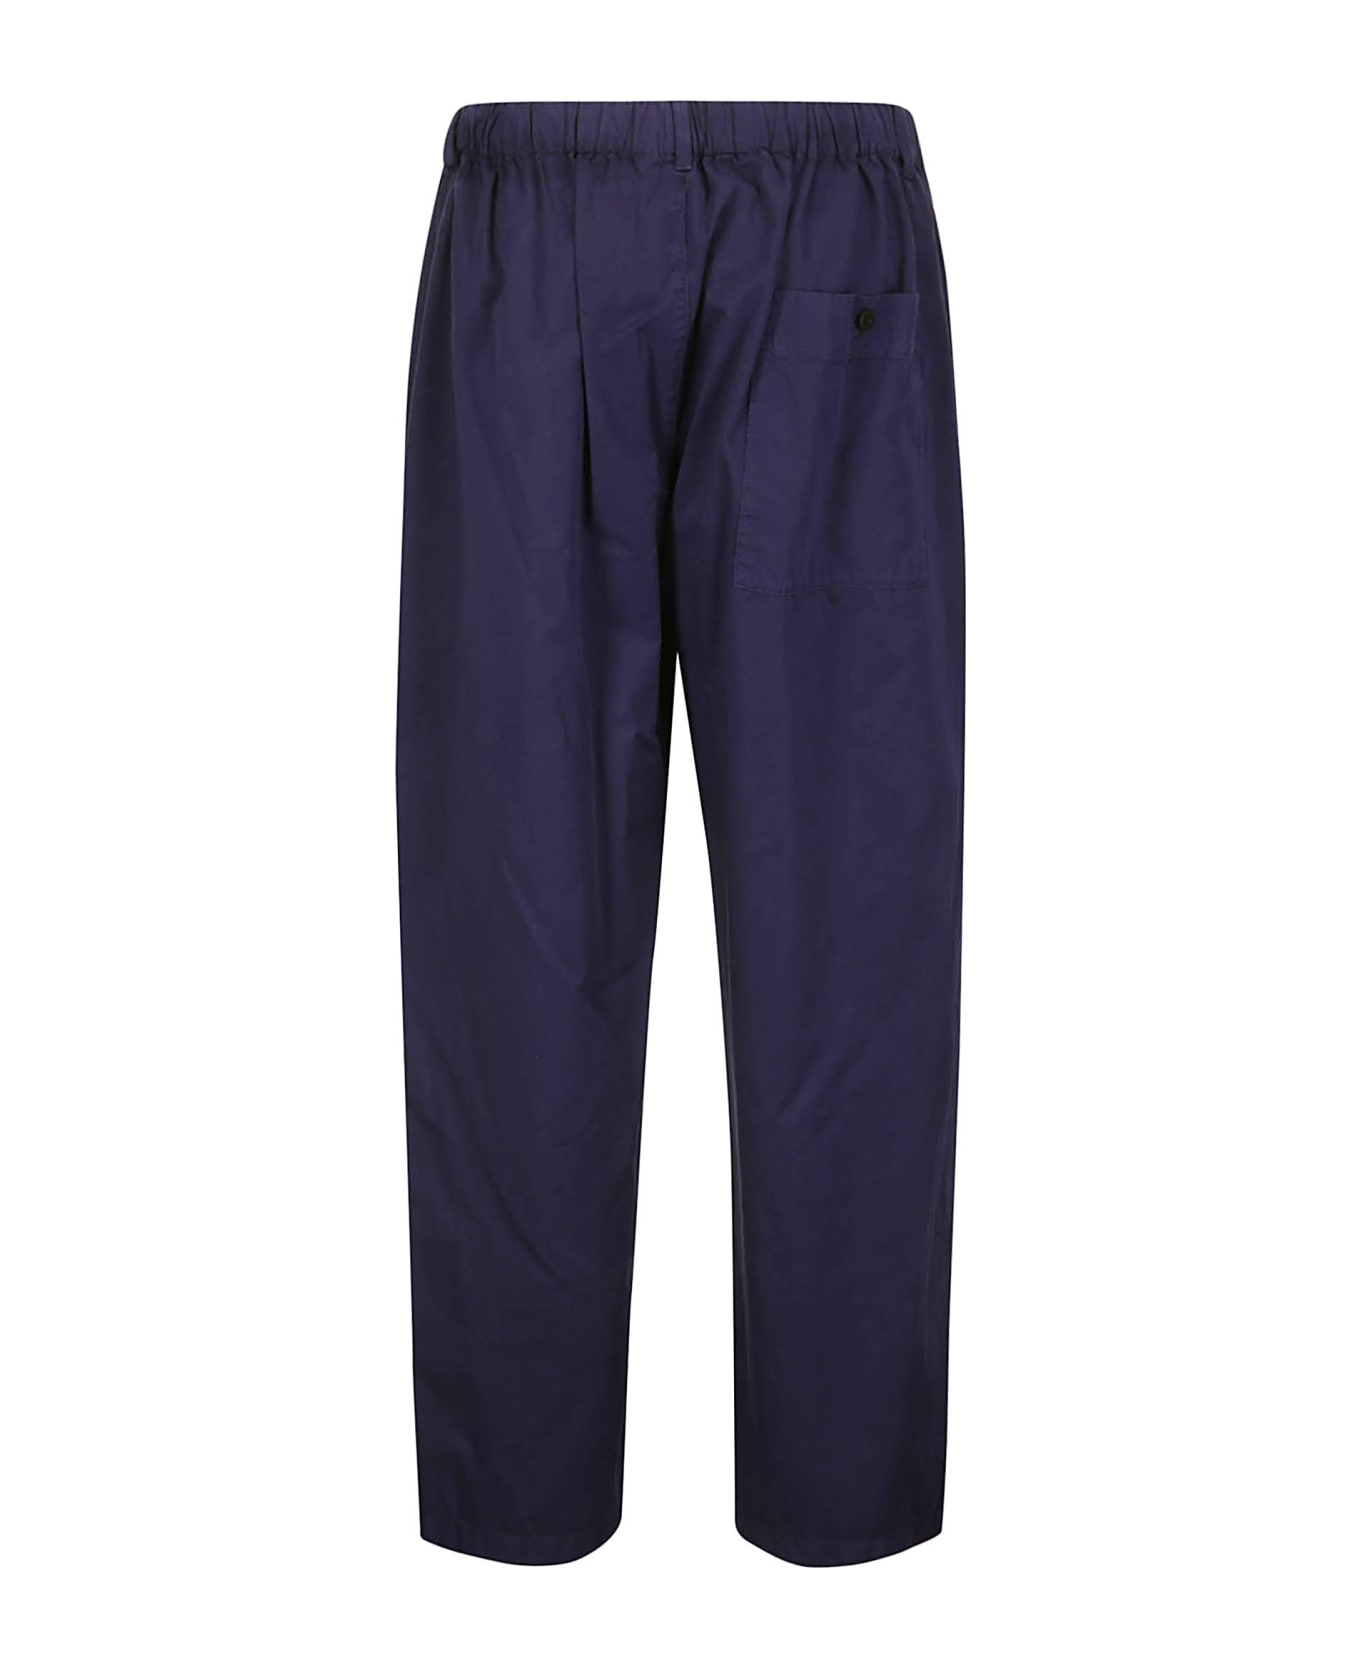 Lemaire Relaxed Pants - BLUE VIOLET